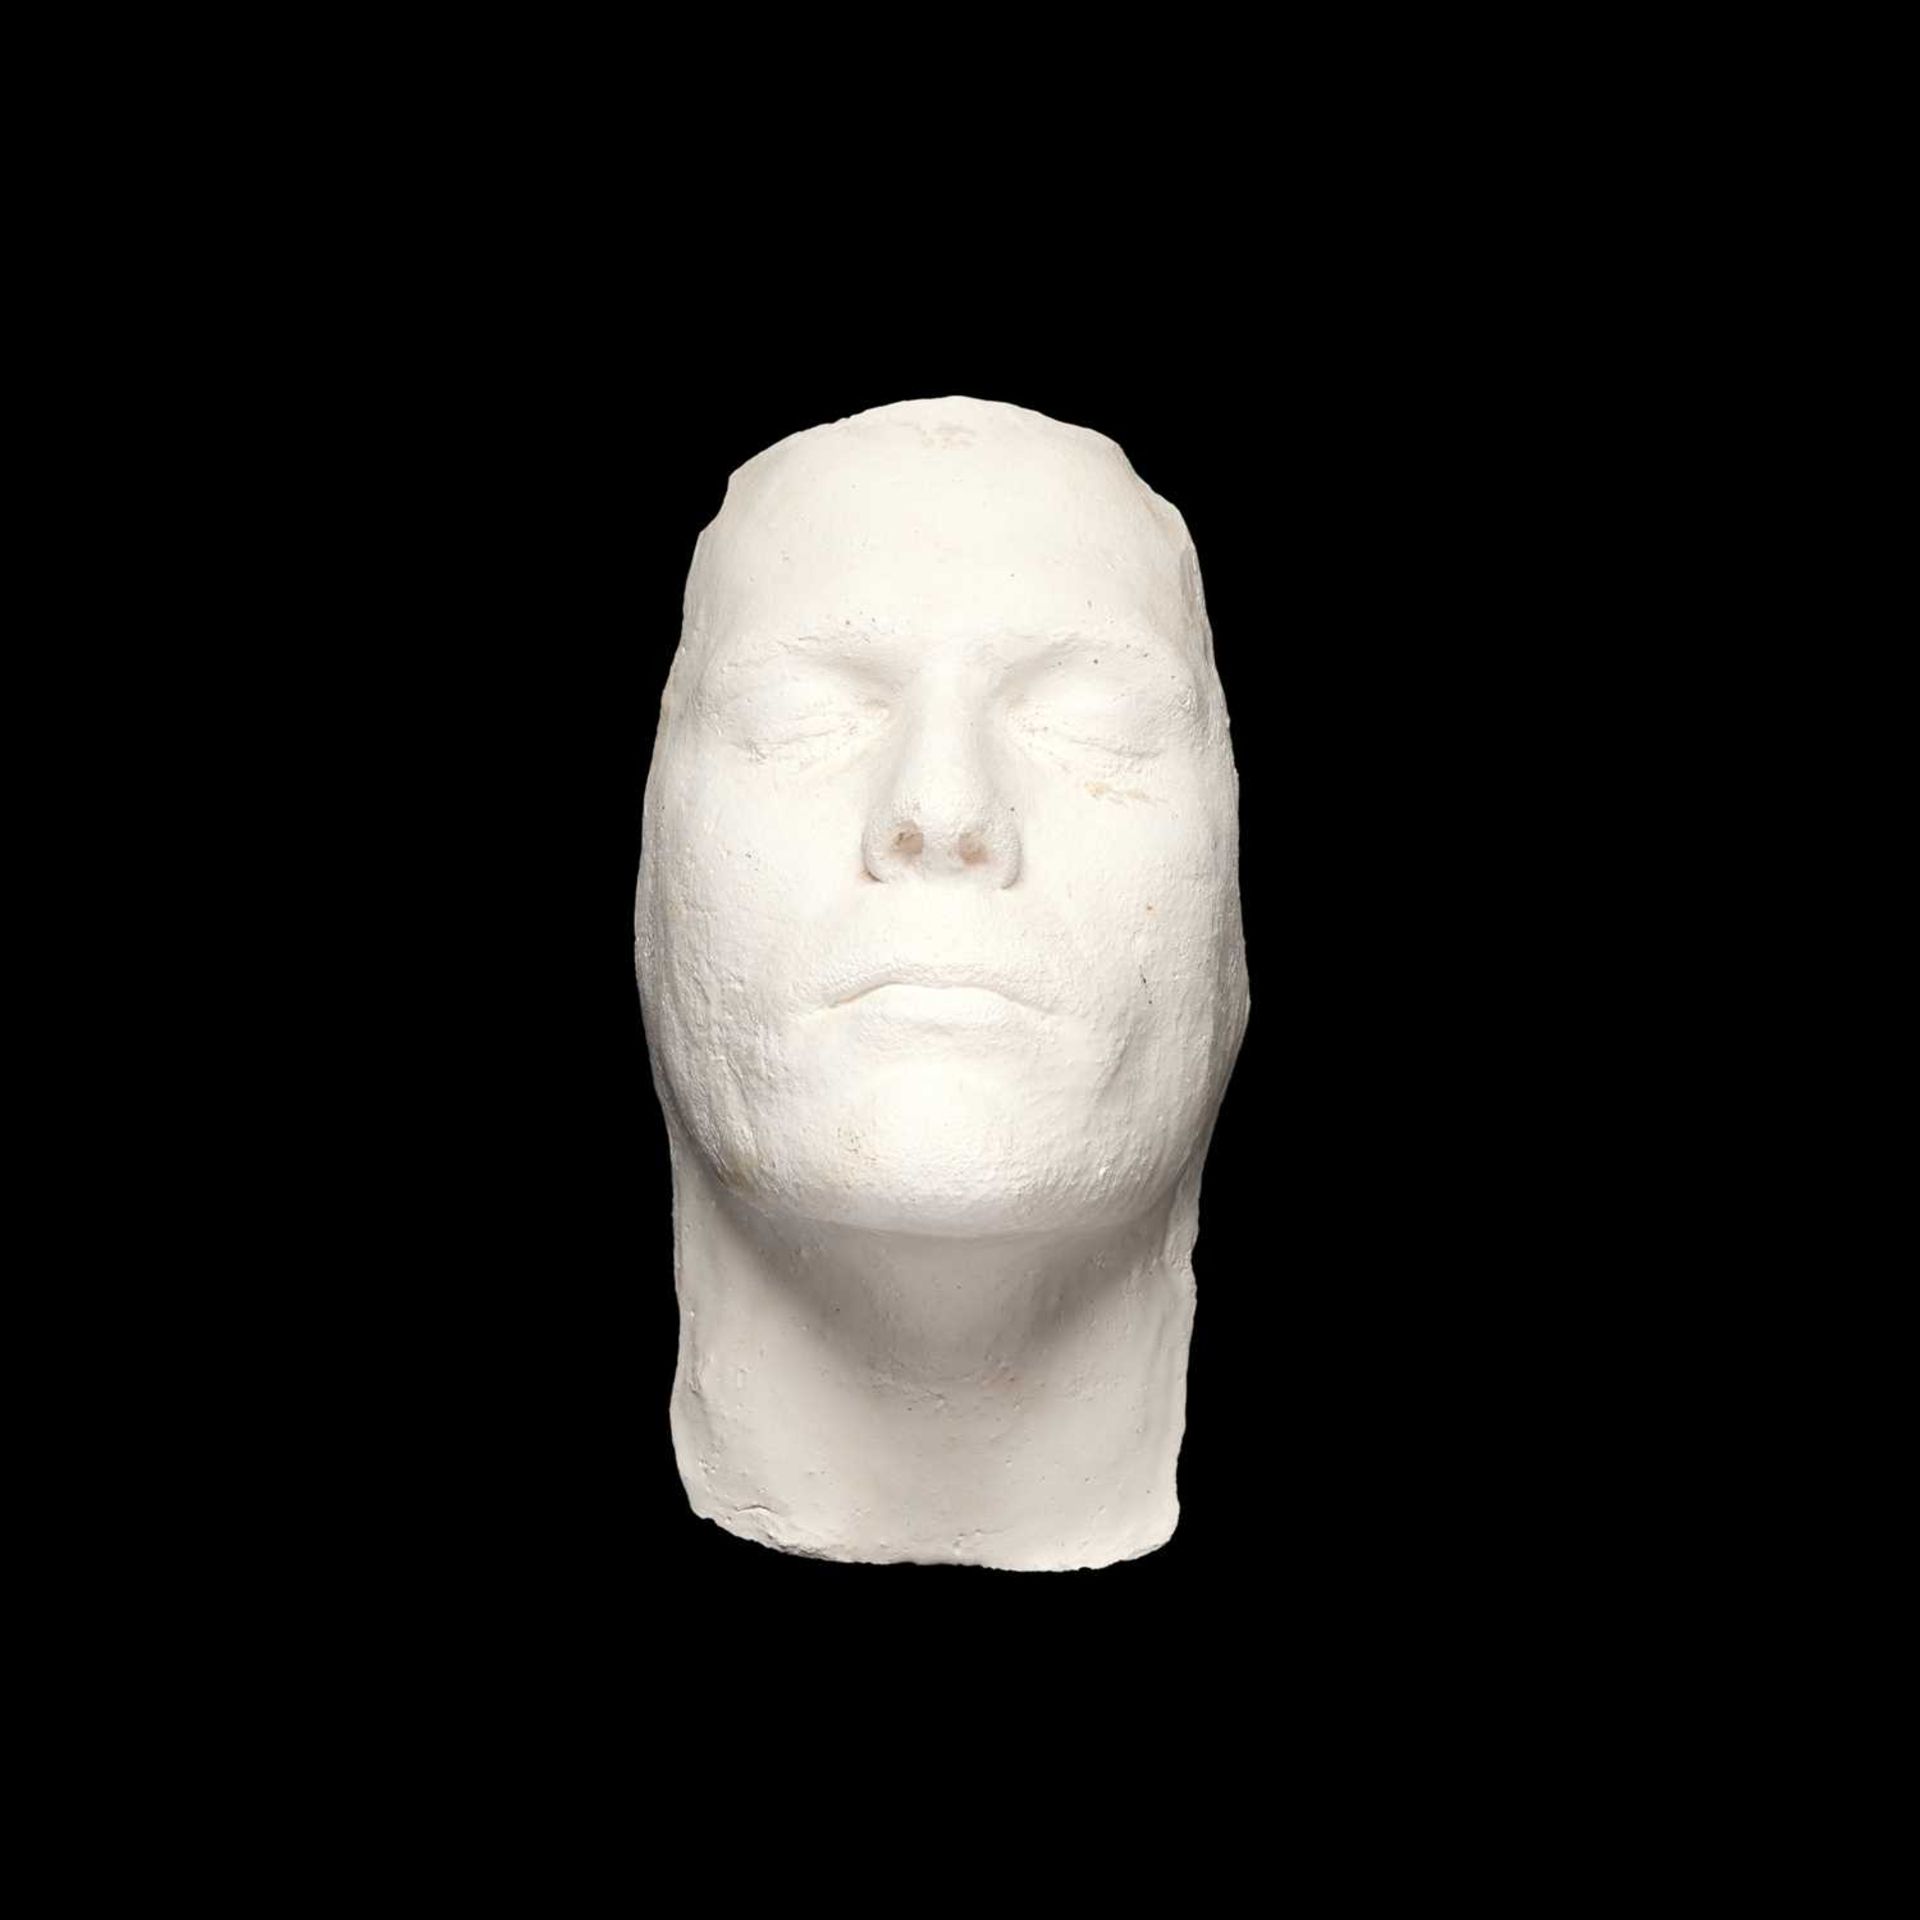 A PLASTER MODEL OF A DEATH MASK